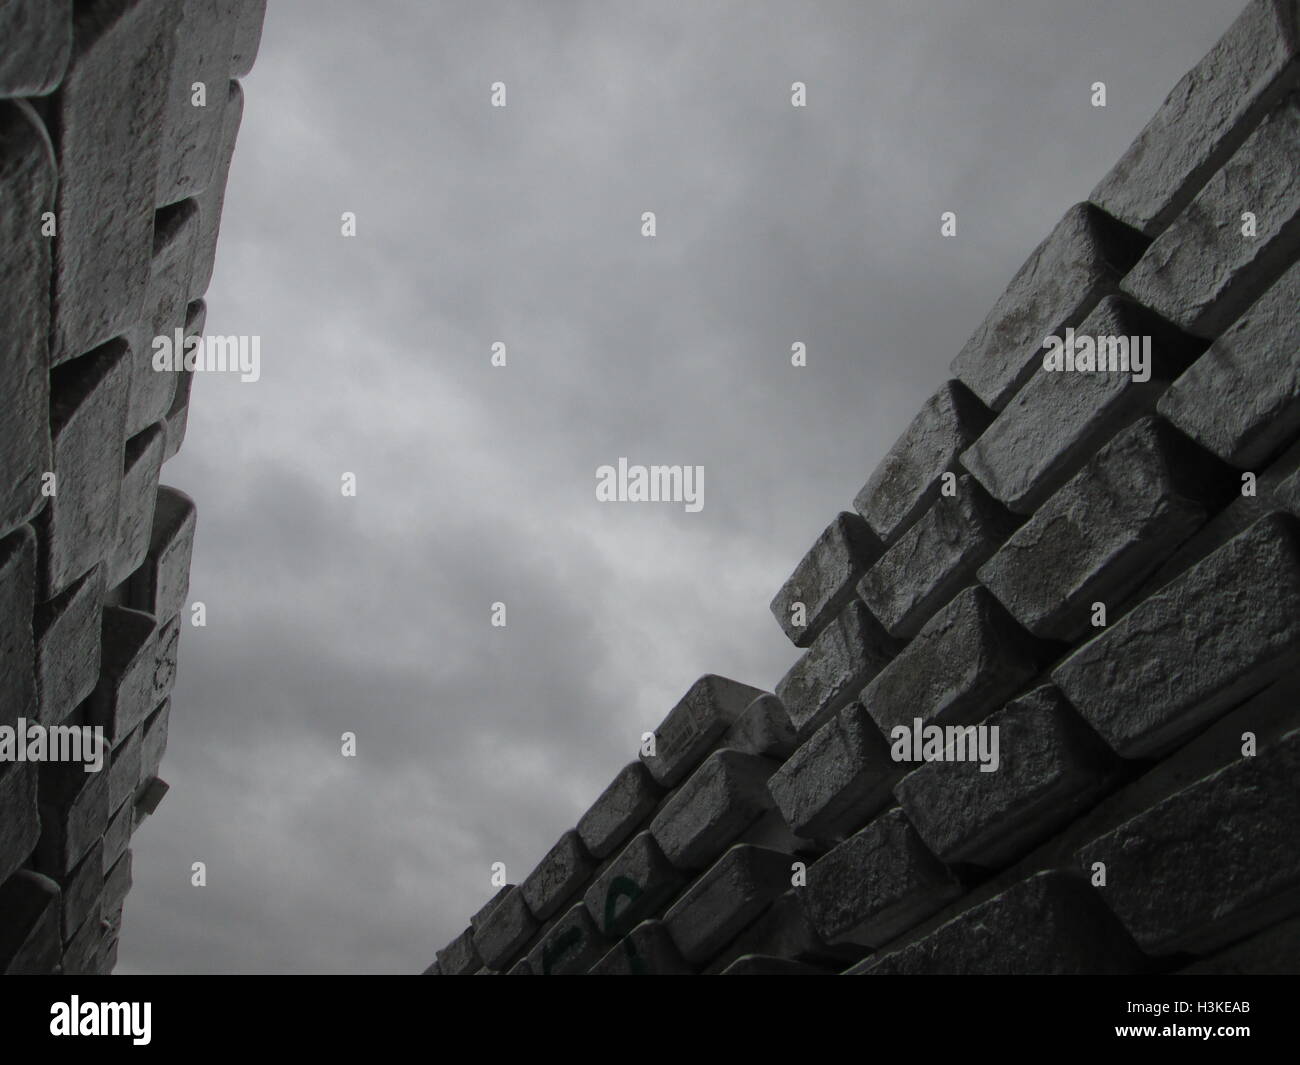 Puerto Ordaz, Venezuela, 10 October 2016.  Weather in Venezuela. Fully it dawned cloudy day in the city this South American country. This image shows a stack of several aluminum ingots produced in an aluminum reduction plant, these companies are mostly in this area of the country, on the photo completely gray sky in the background can be seen. Jorgeprz / Alamy Live News. Stock Photo